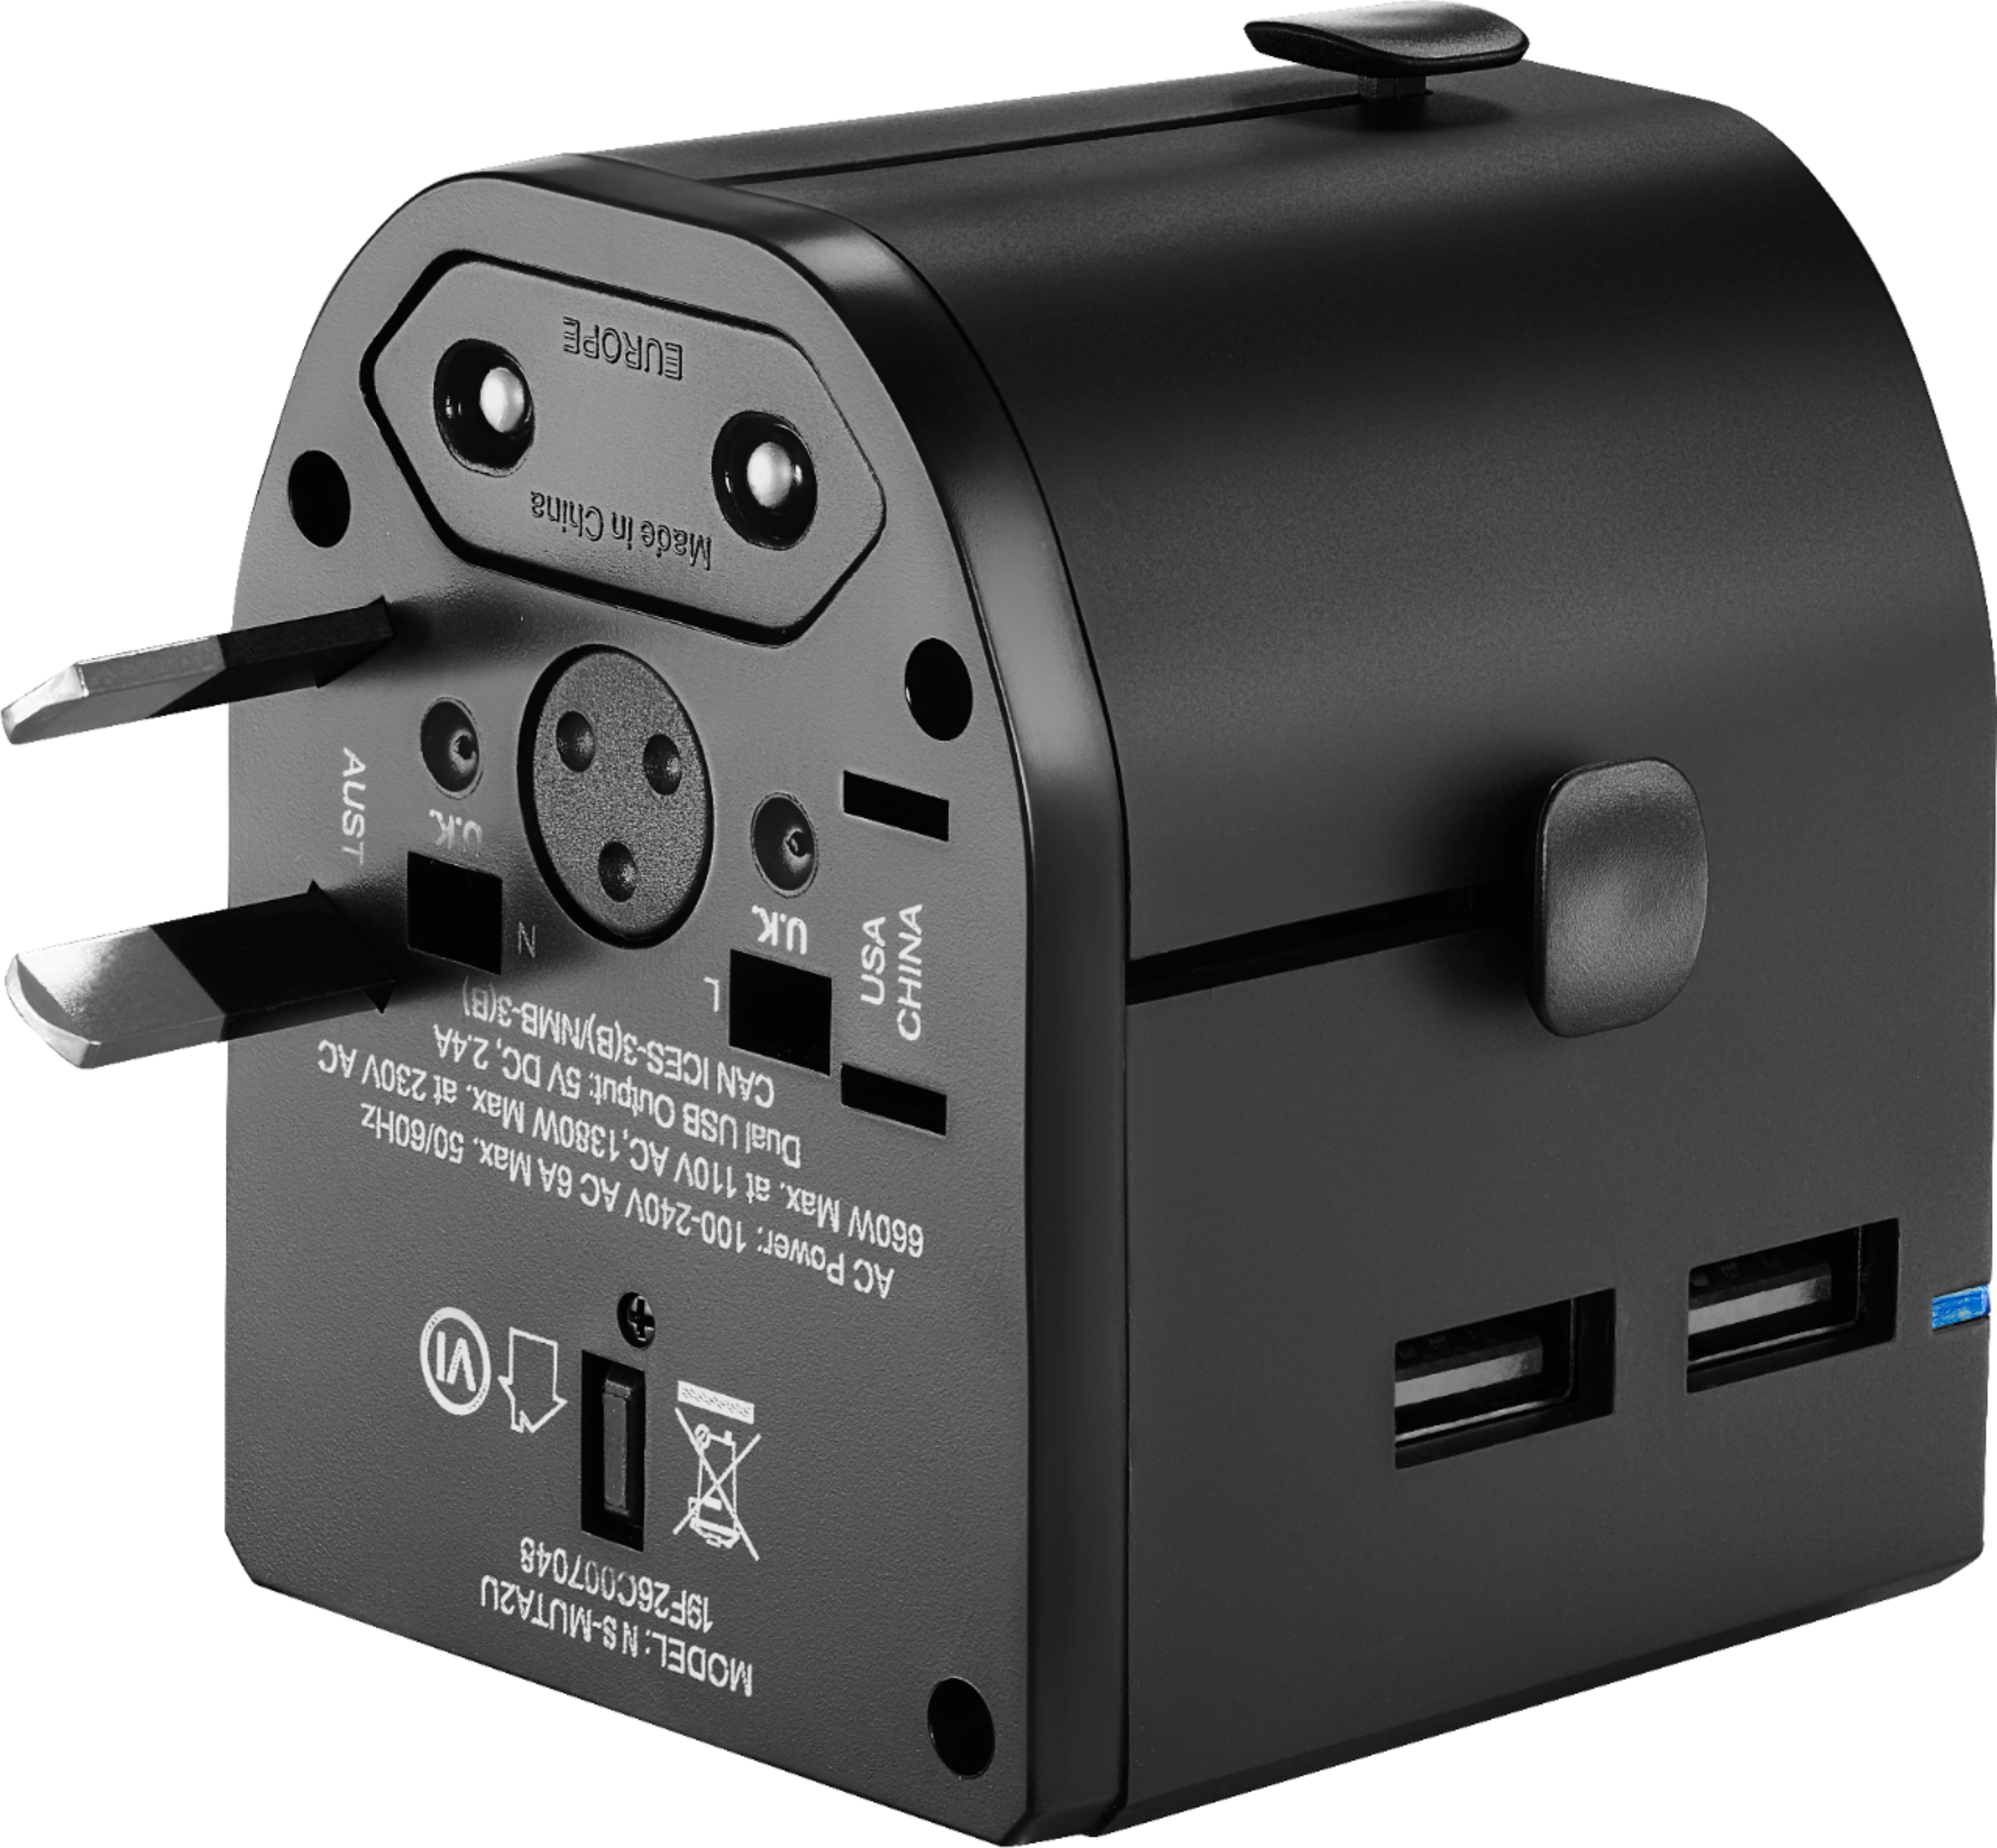 TESSAN Universal Power Adapter, International Plug Adapter with 4 USB  Outlets, Travel Worldwide Essentials, All in 1 Wall Charger Converter for  UK EU